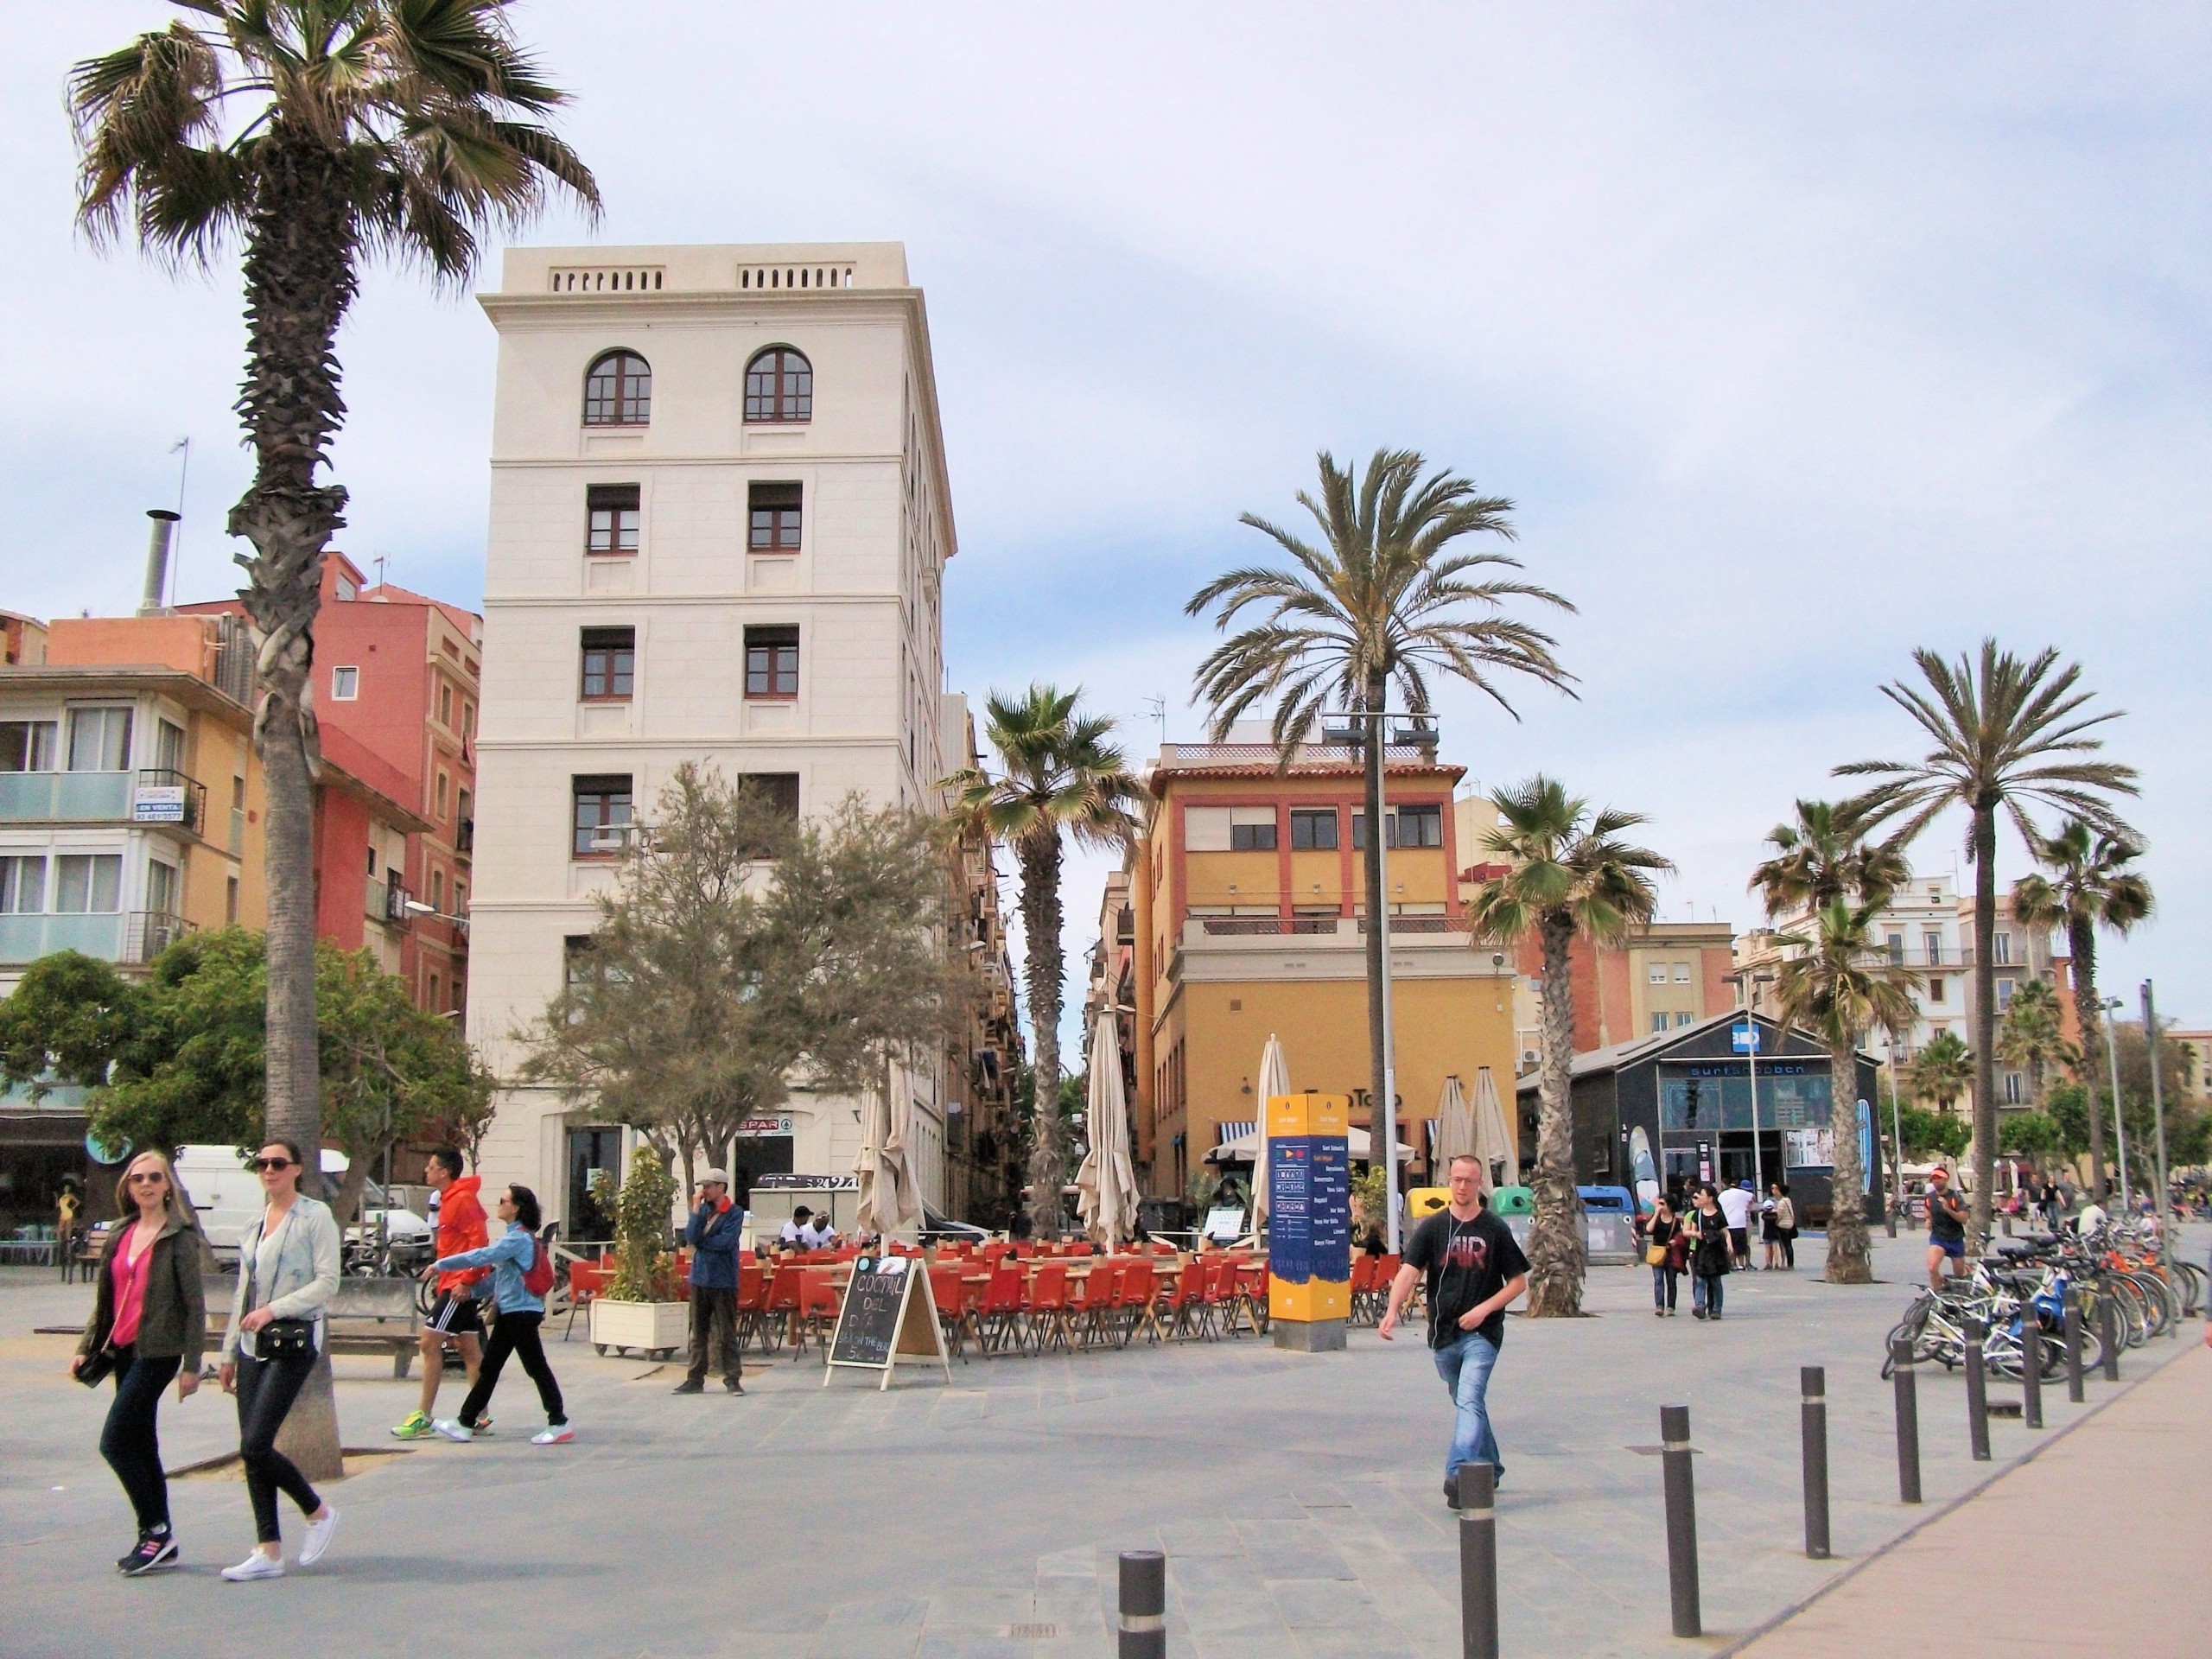 The Ramblas de Pouble Nou, leading down to the seafront, are lined by apartments sought after by tourists